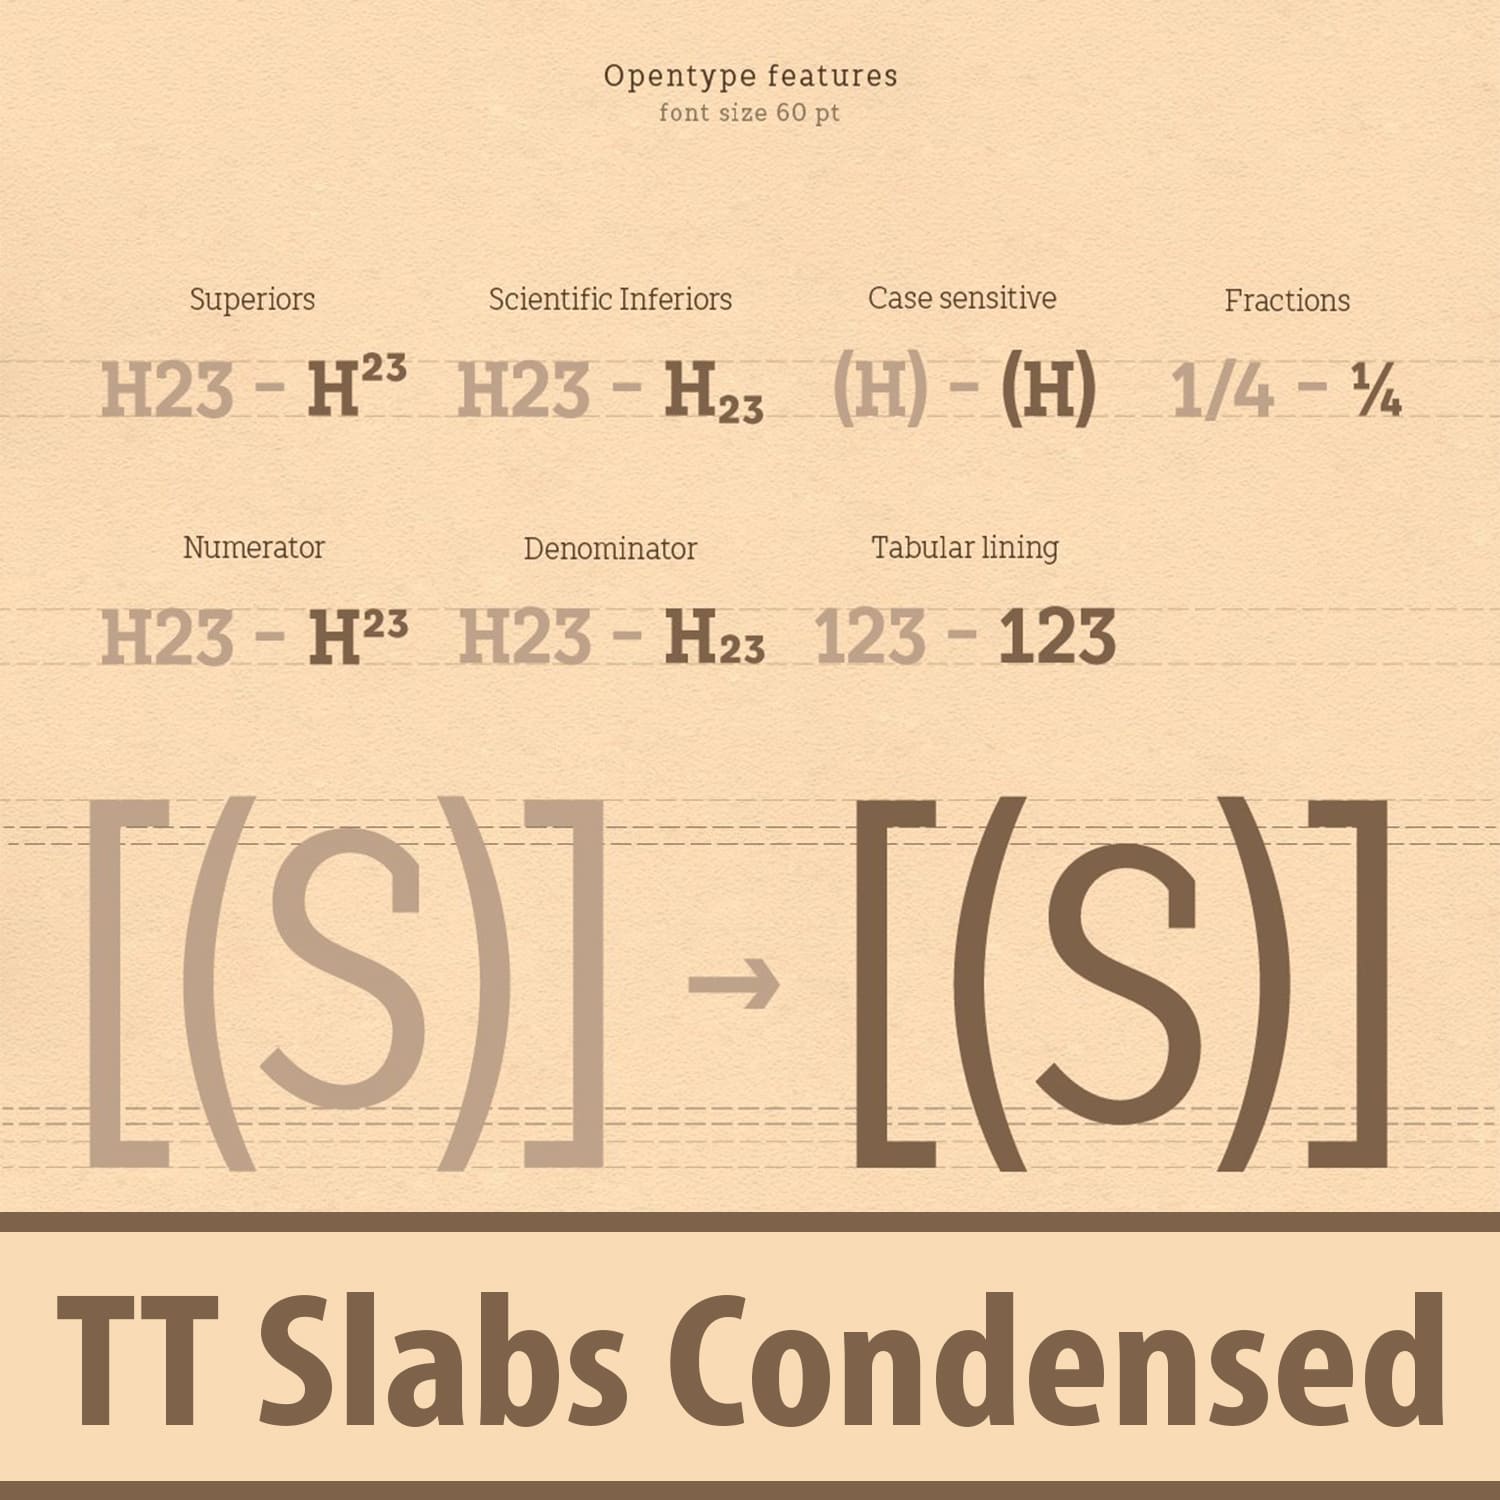 TT Slabs Condensed cover image.